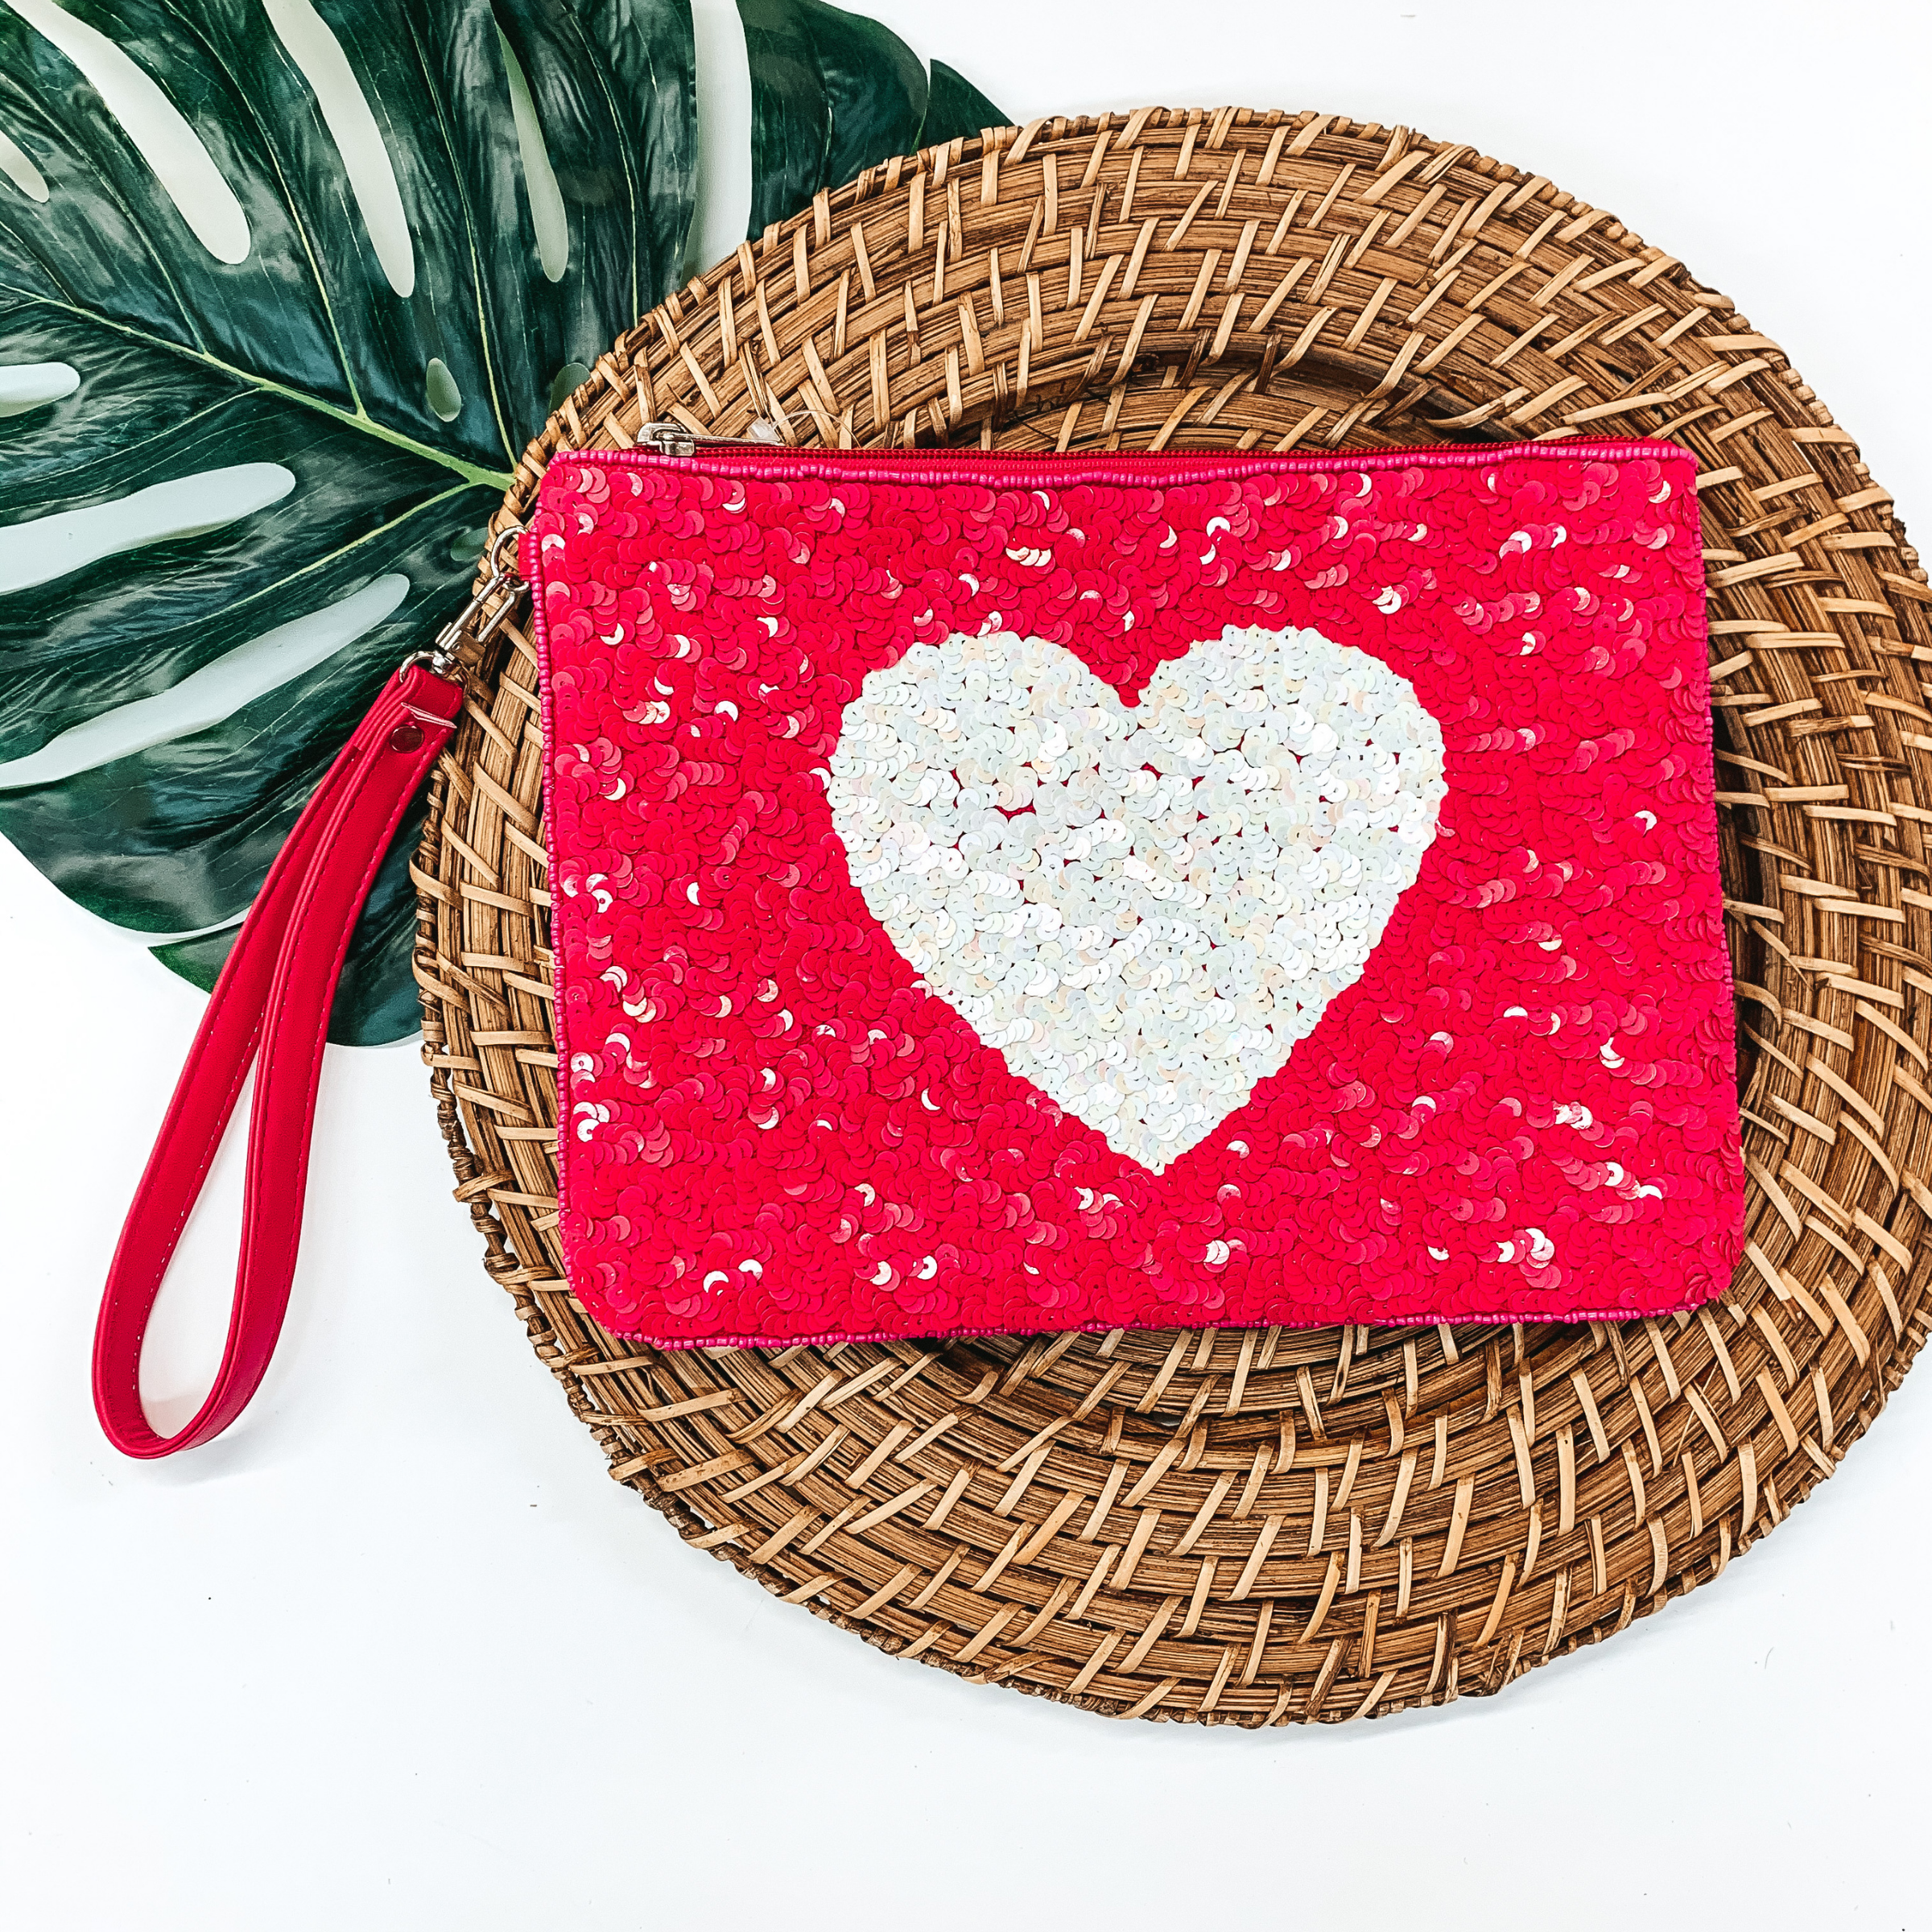 Sequin White Heart Clutch in Fuchsia - Giddy Up Glamour Boutique